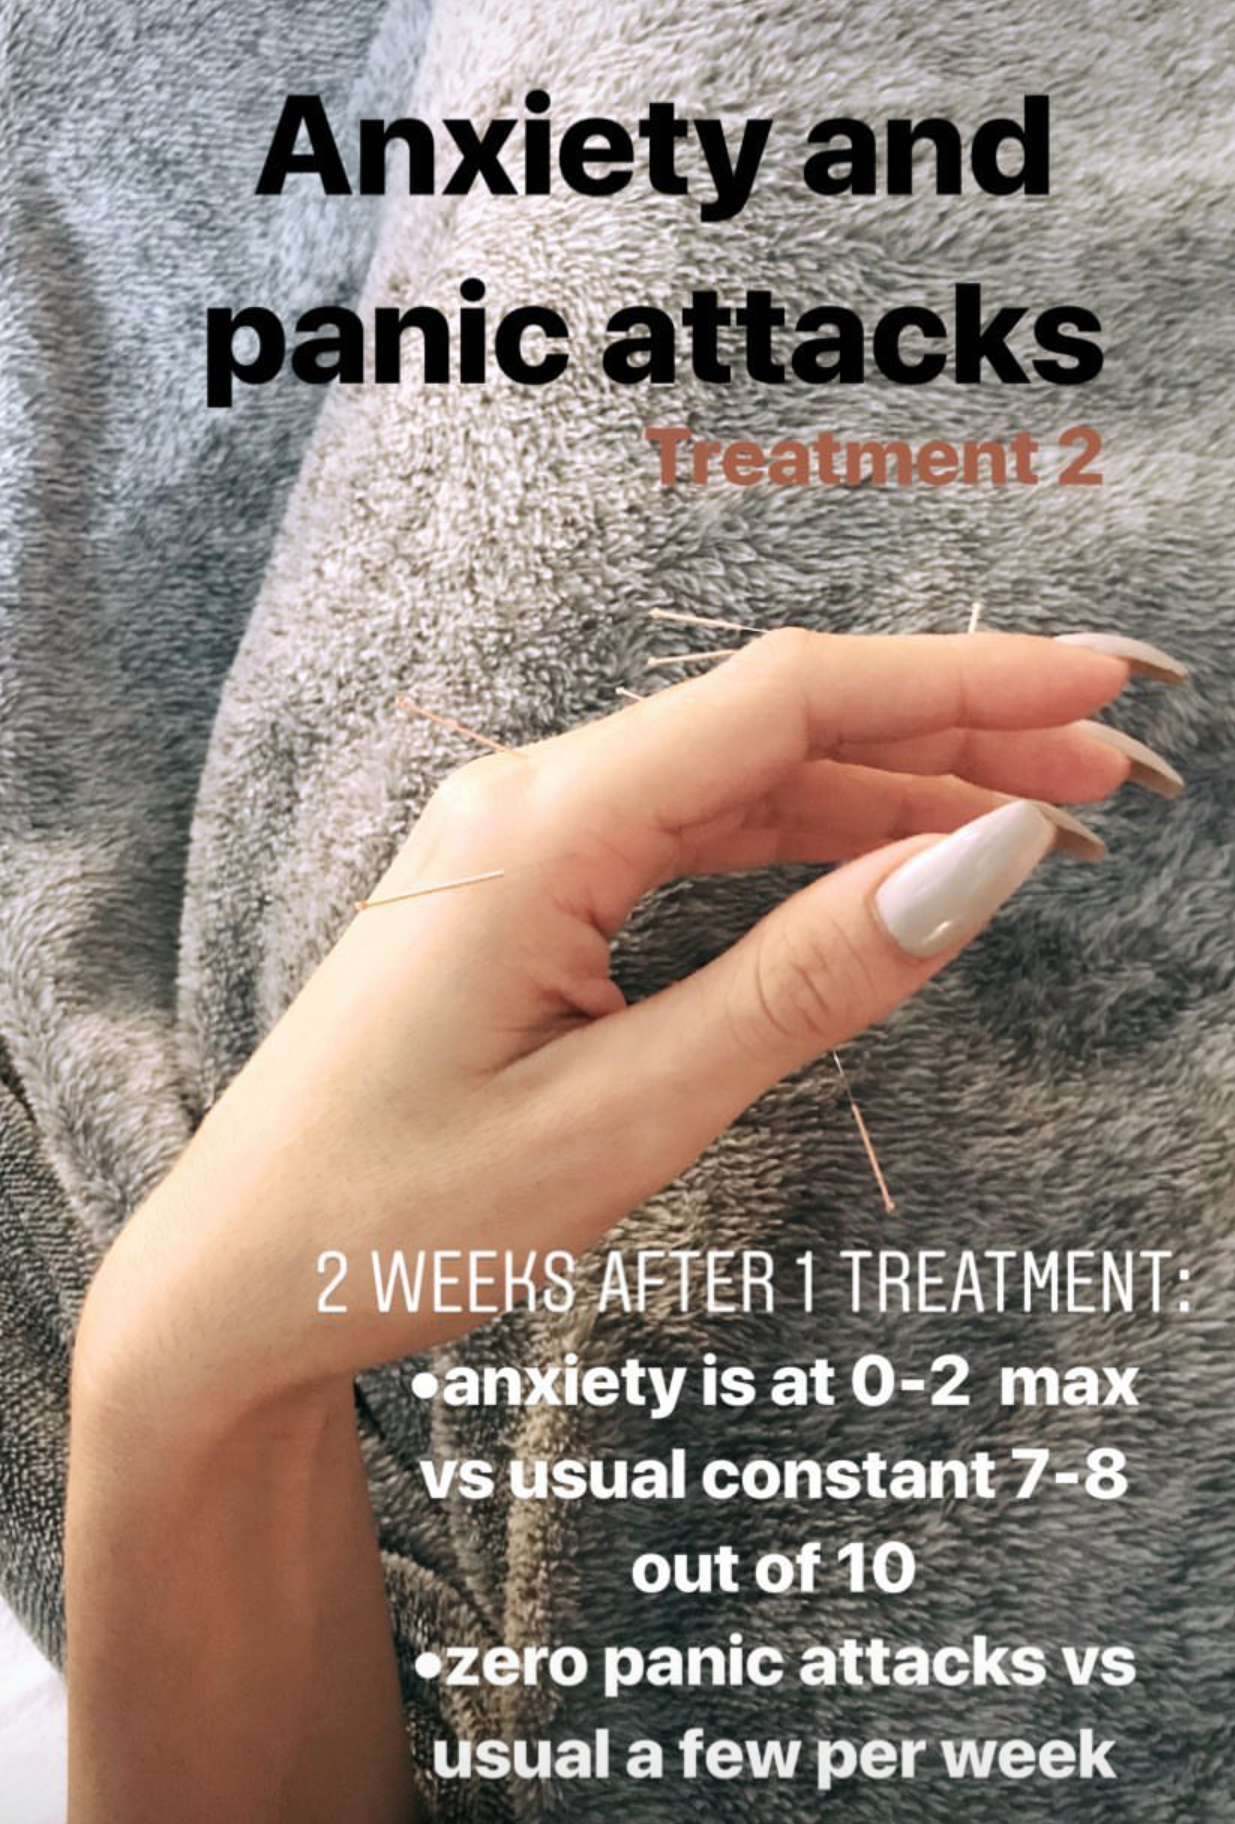  SuJok acupuncture in Vancouver used for treating mental health issues. Patient received treatment for anxiety and panic attacks. Treatment results in the successful reduction of panic and anxiety attacks  